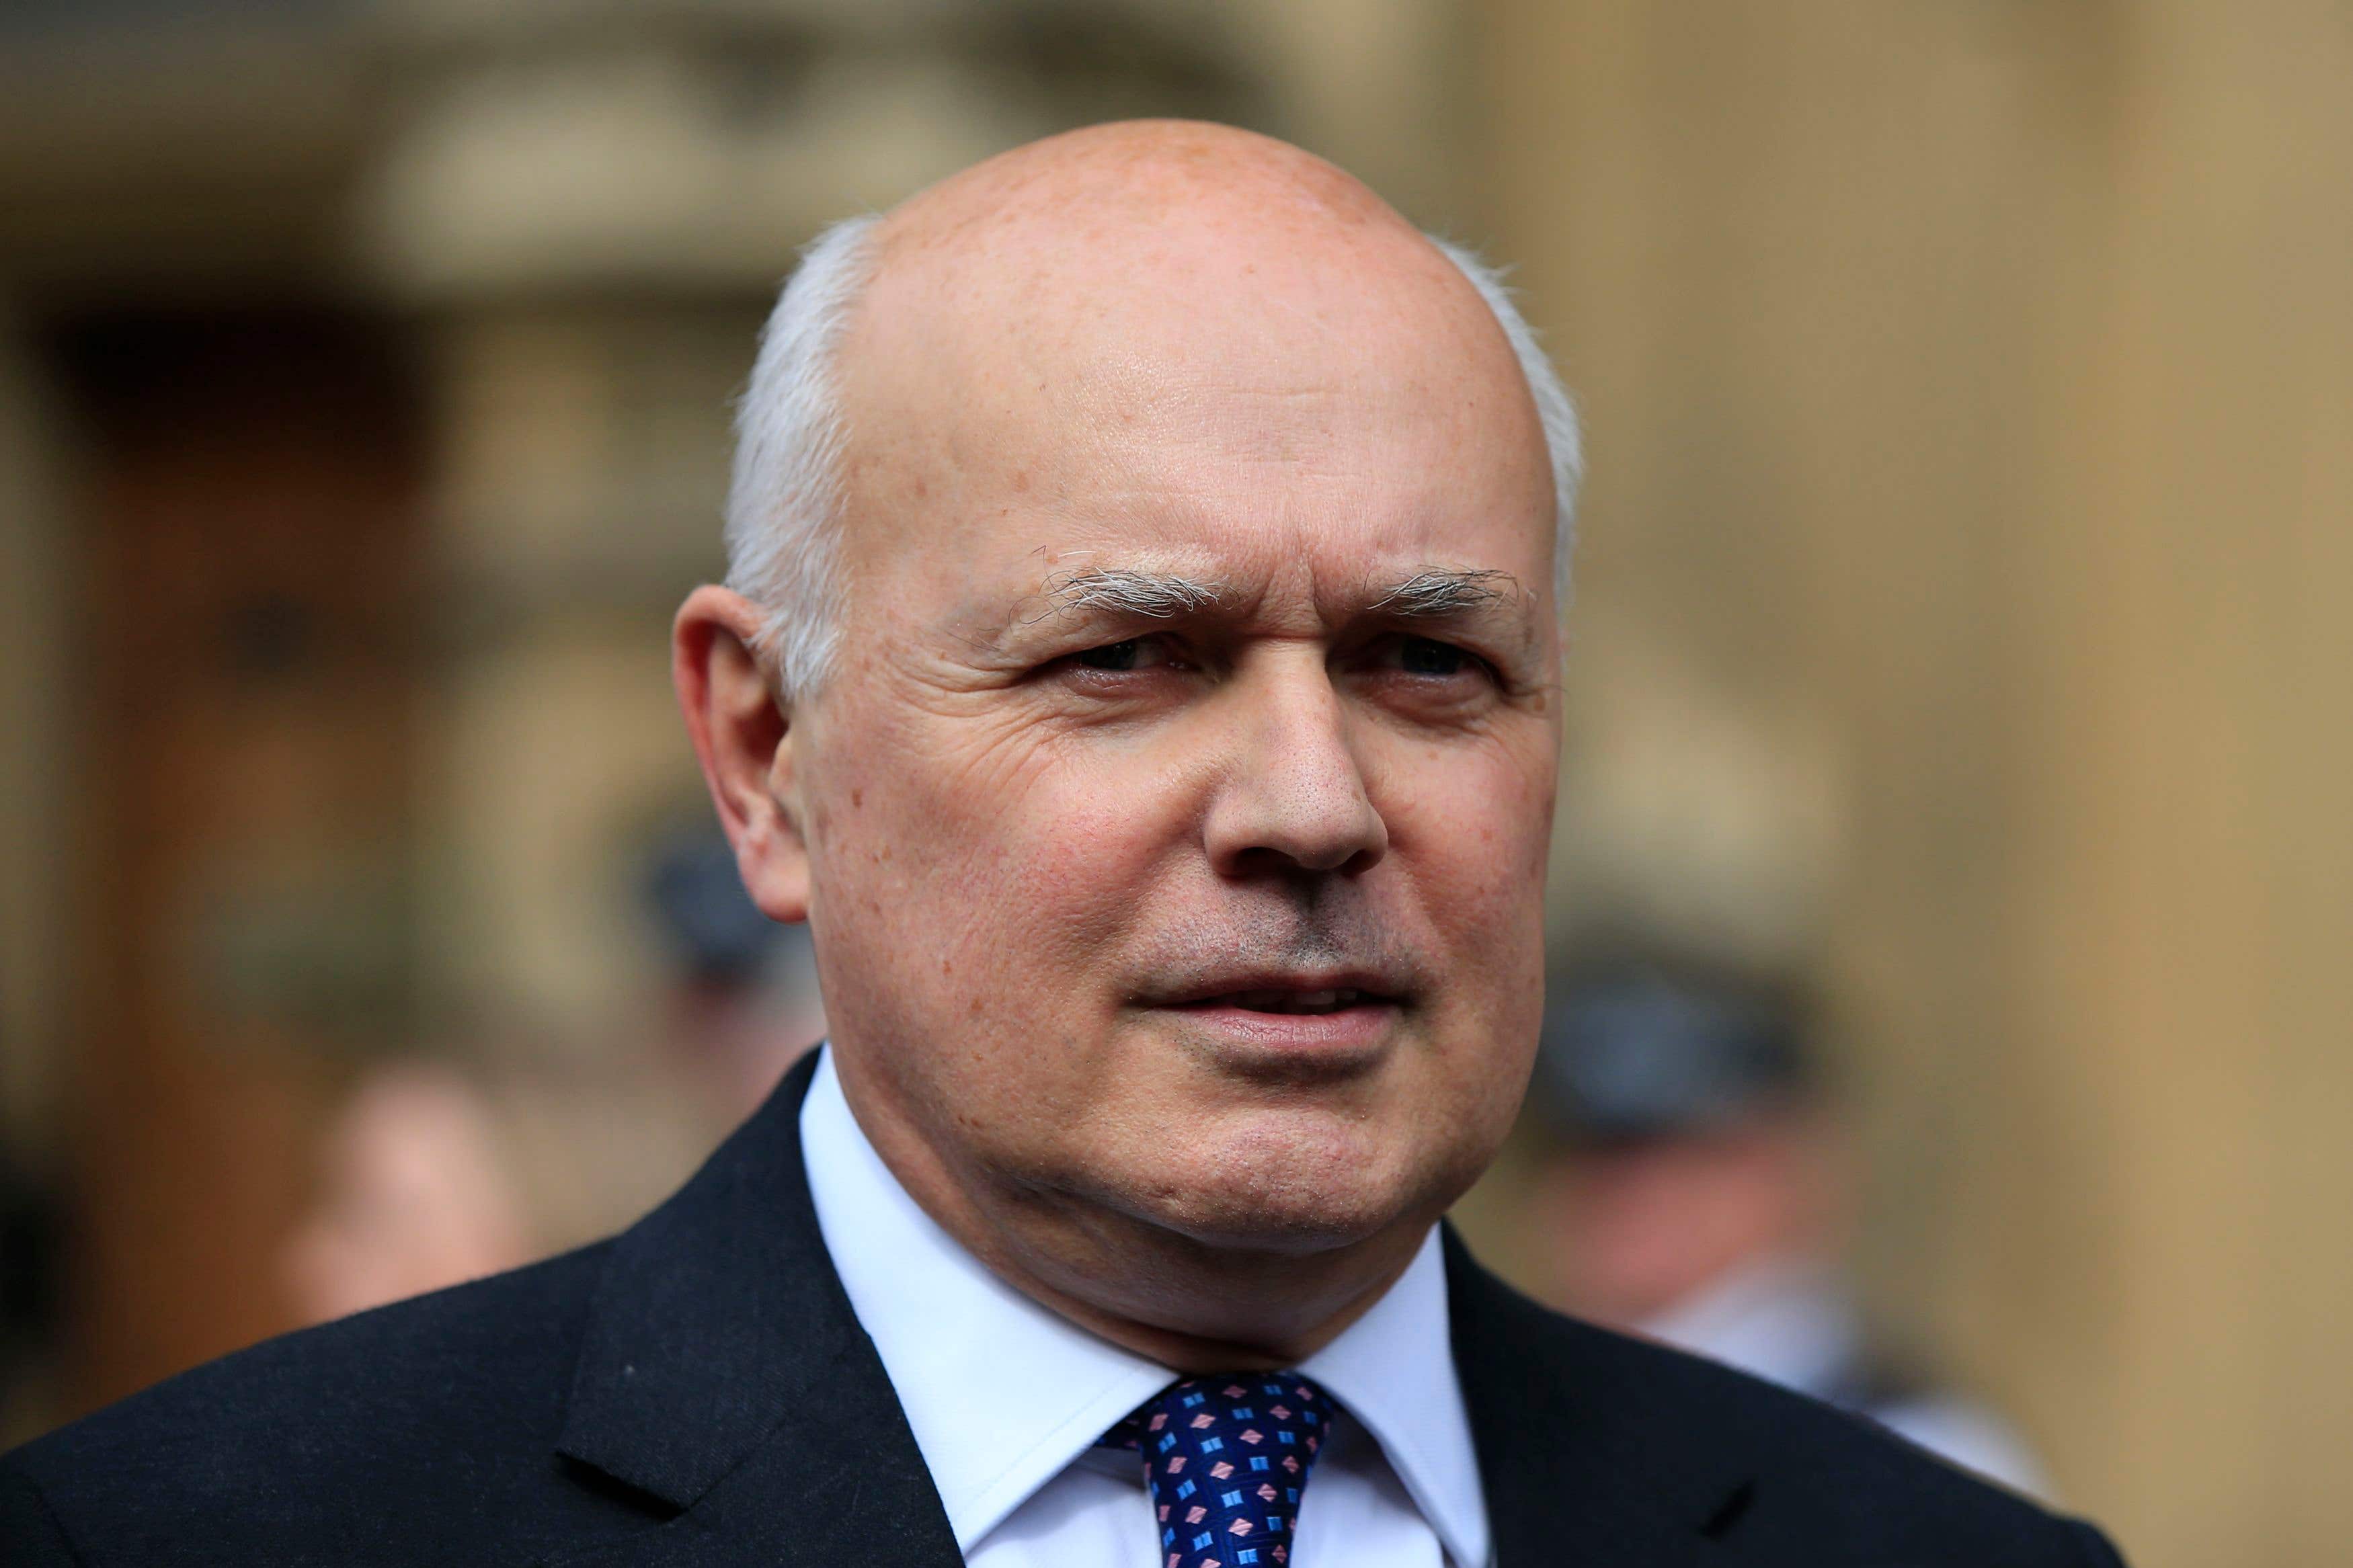 Sir Iain Duncan Smith says government policy is a ‘shambolic mess’